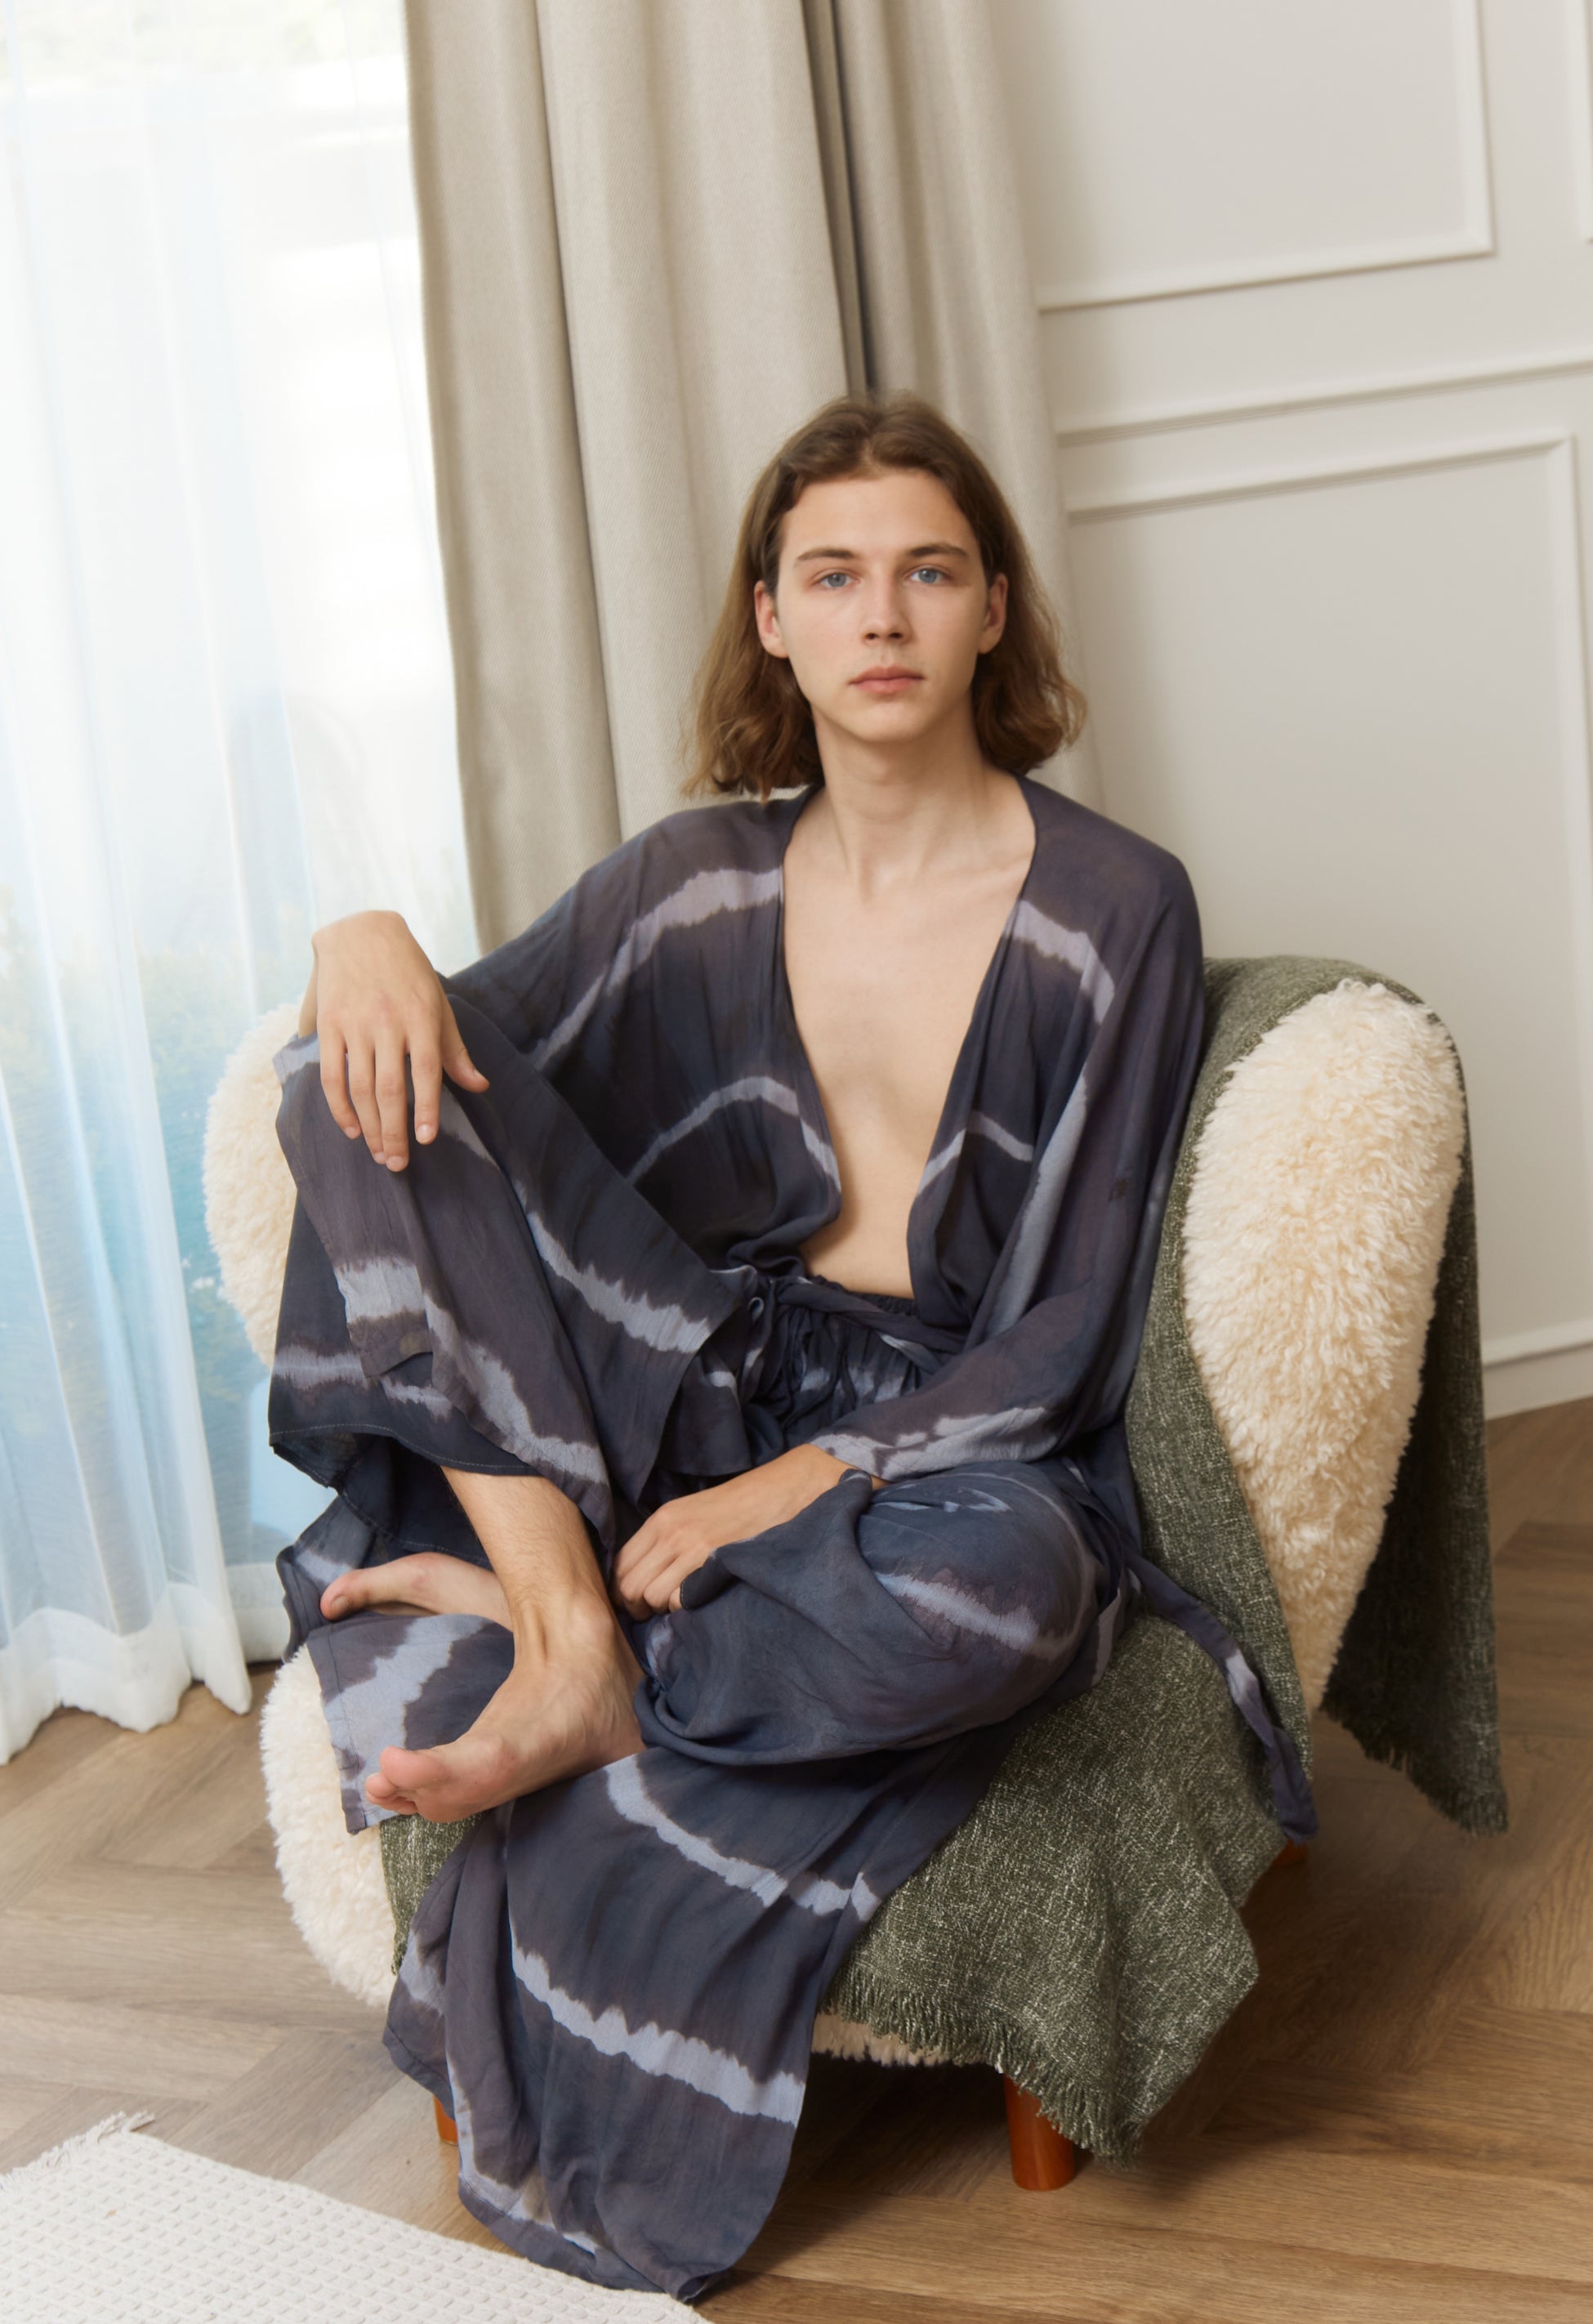 Enjoy every day every with our tie dye long kimono robe, comfy loungewear and timeless design all handmade with love by Coco de Chom 